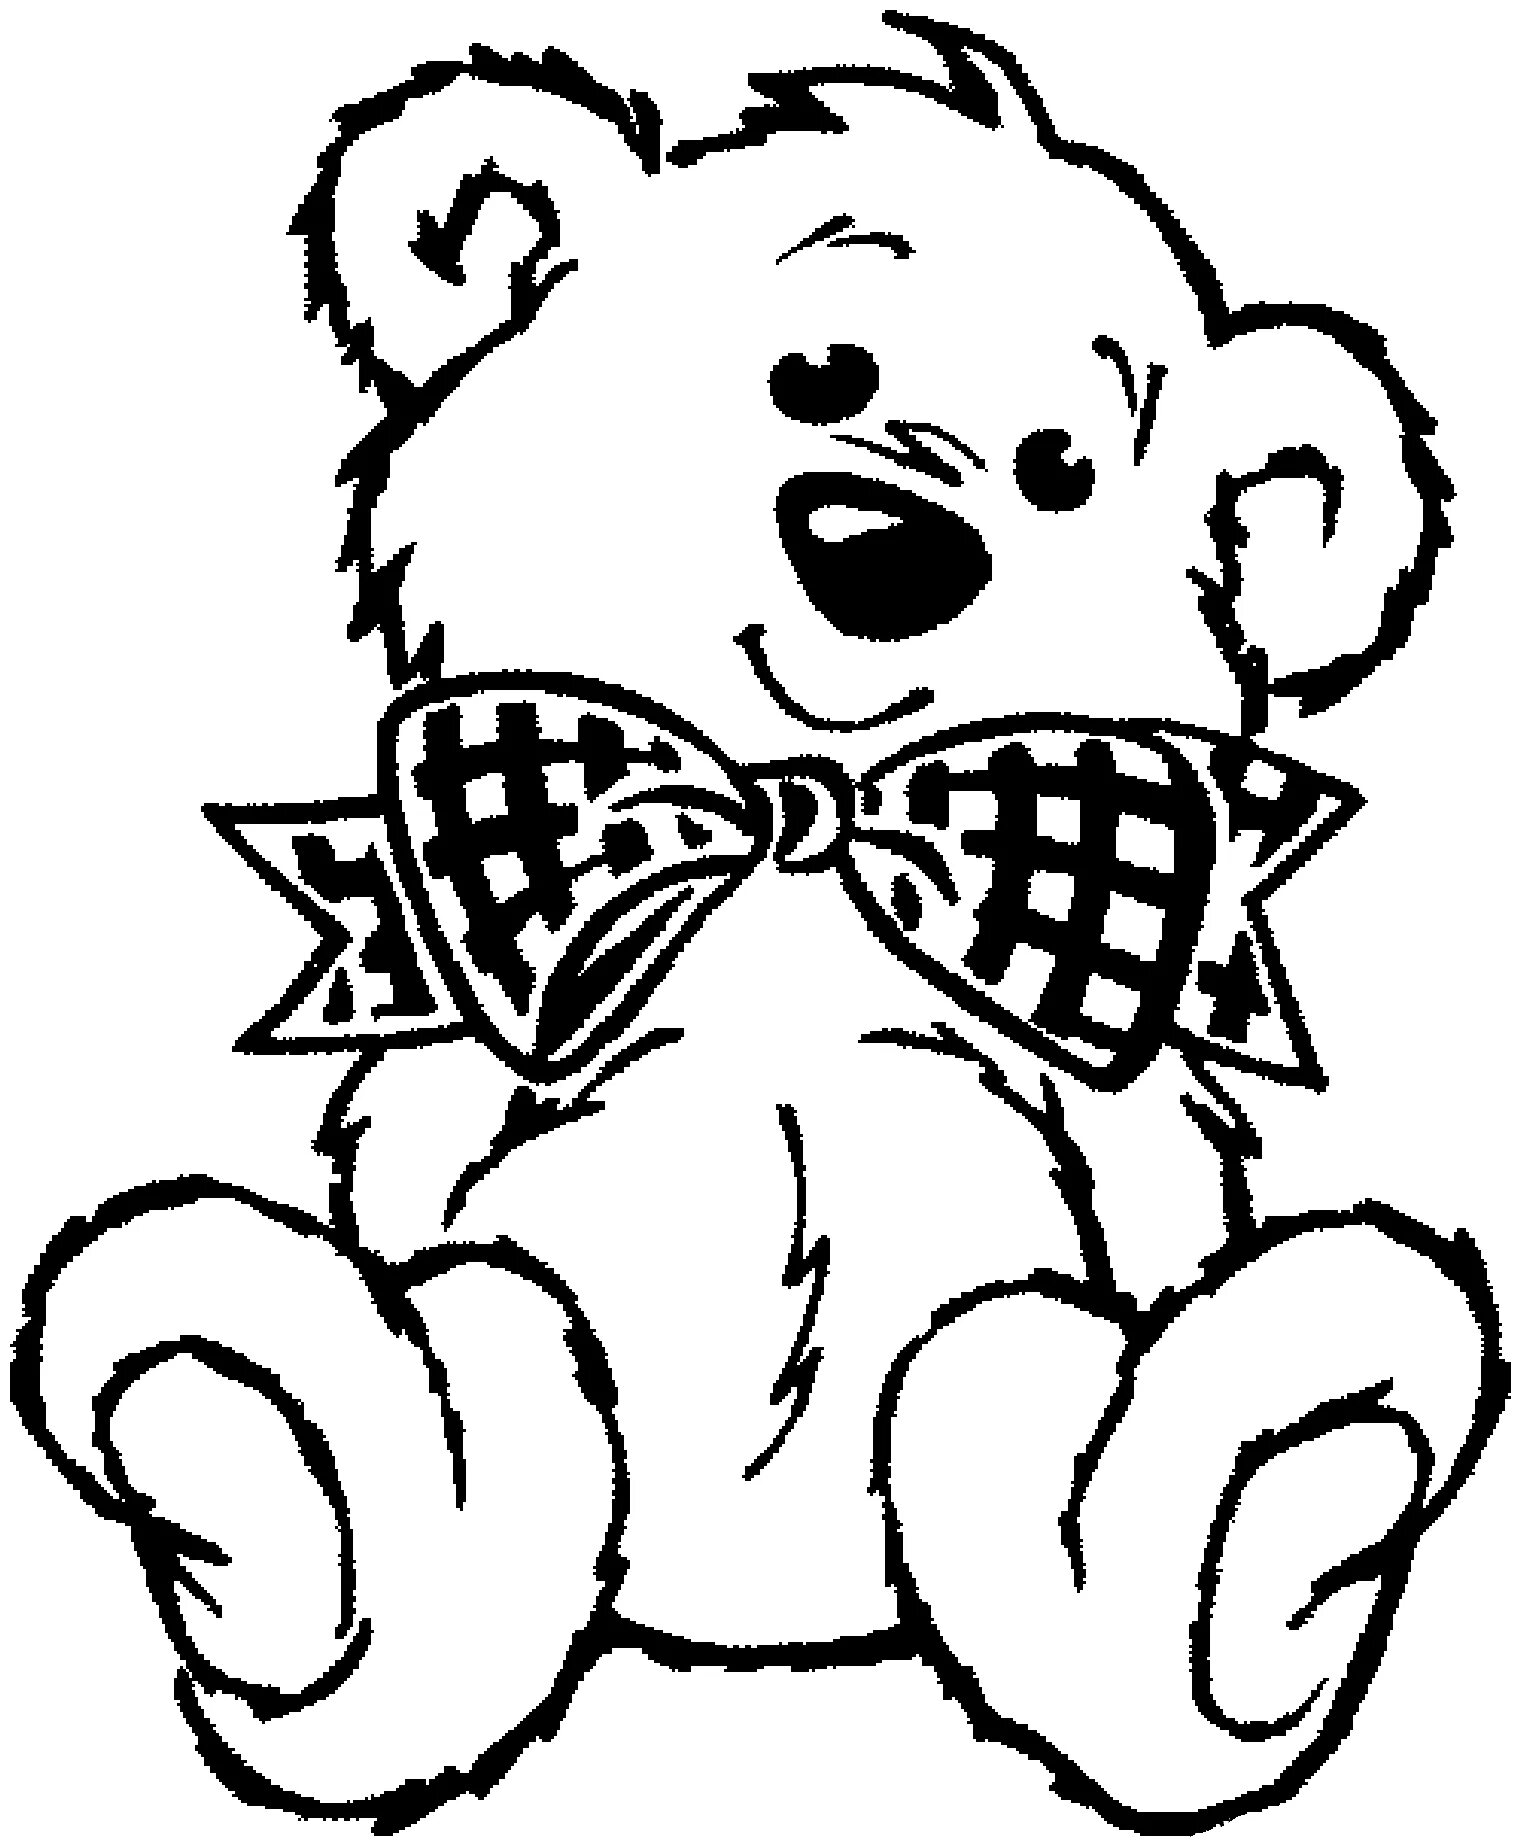 Coloring page giggling teddy bear